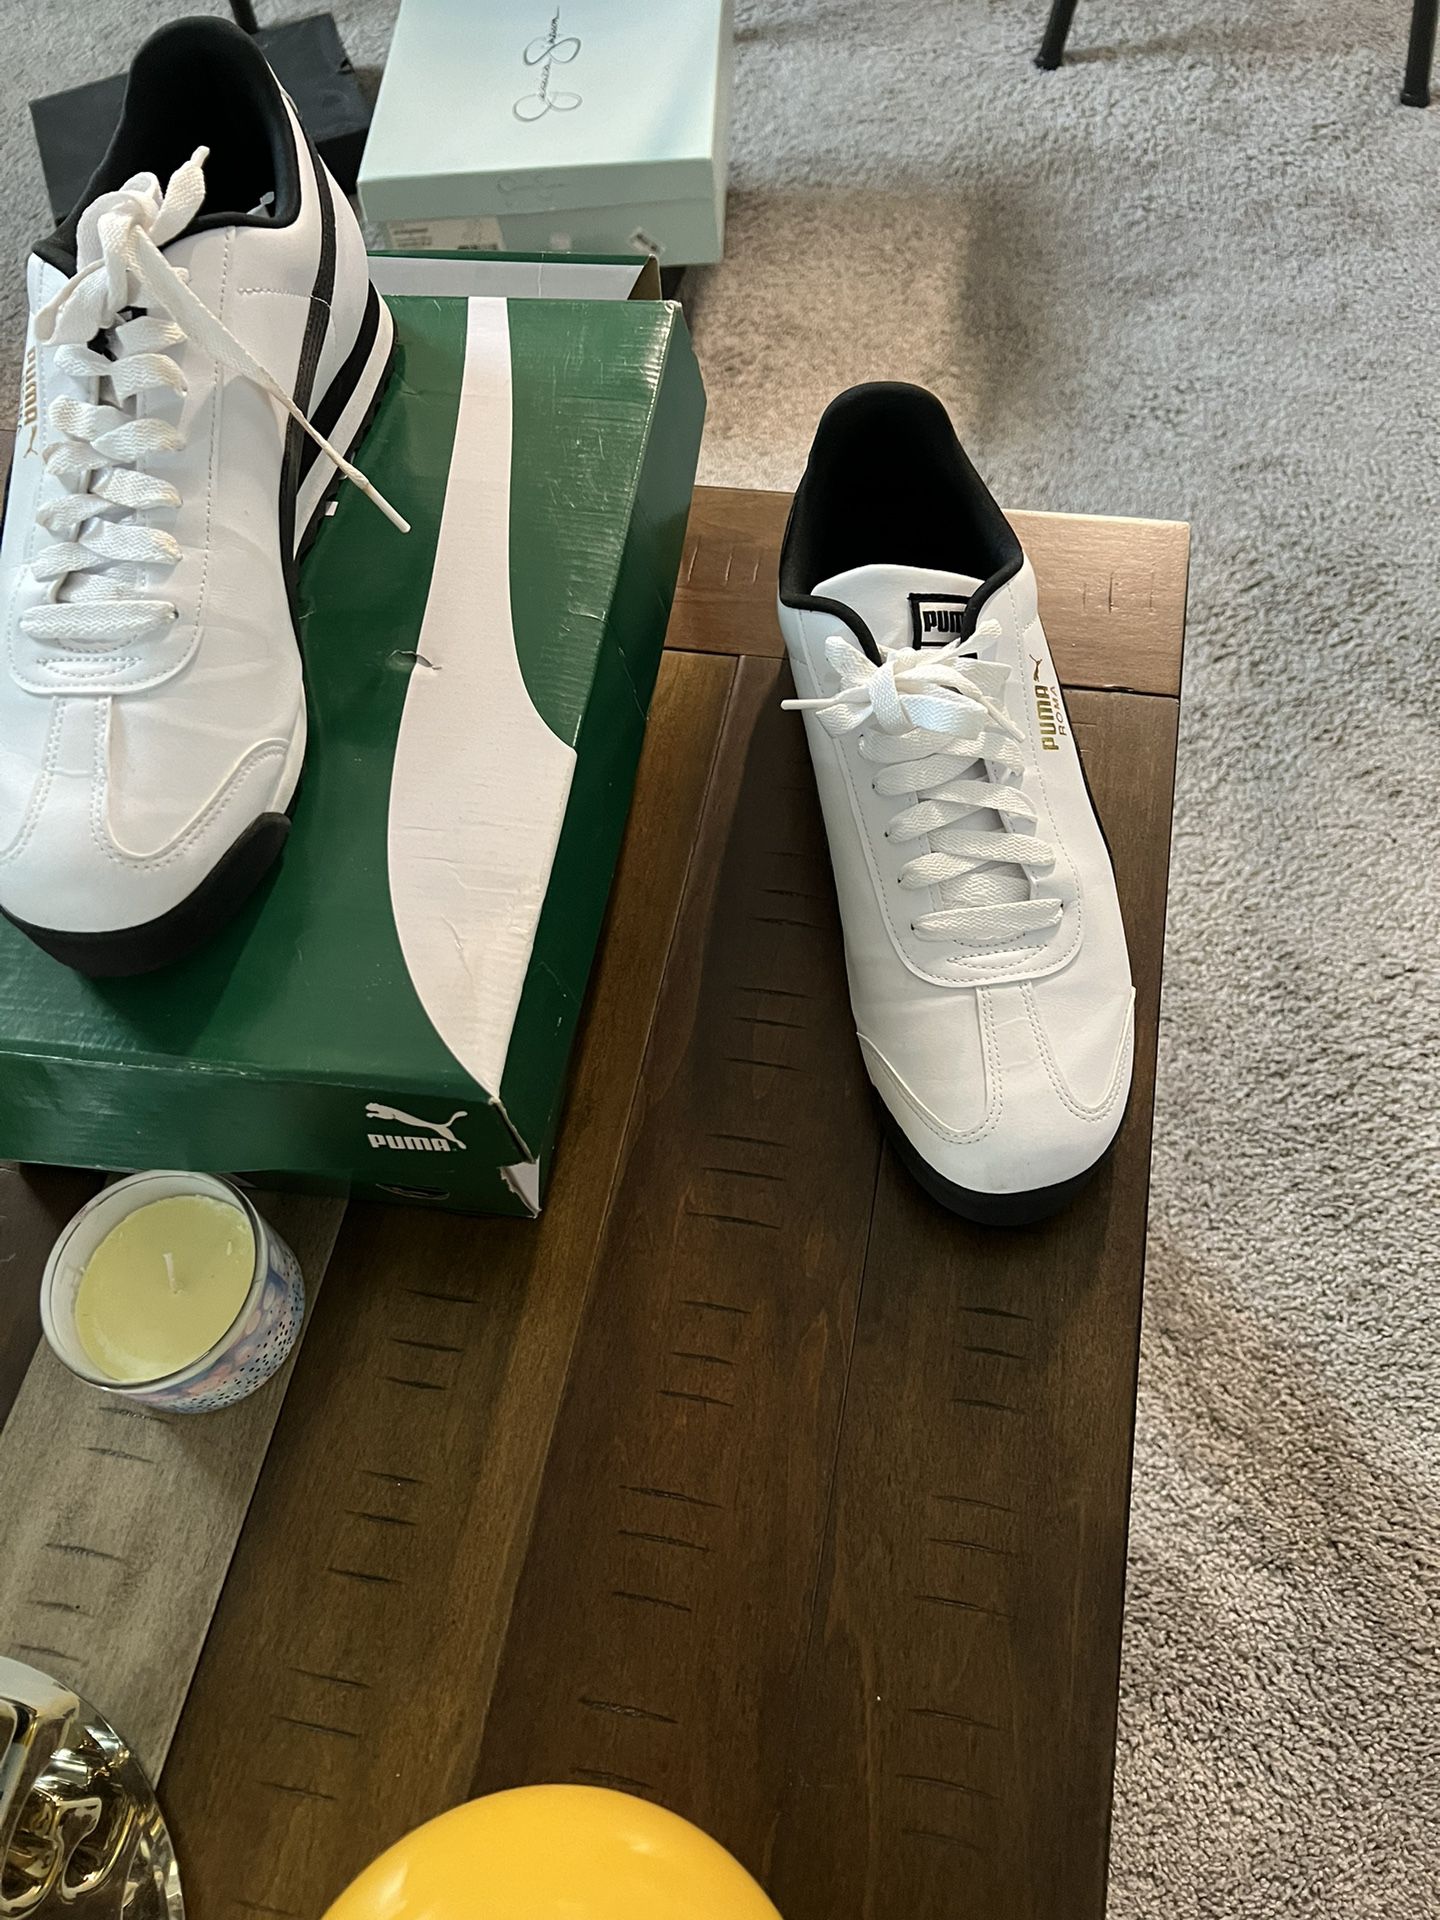 Brand New Puma Sneakers Size 12 In Box 